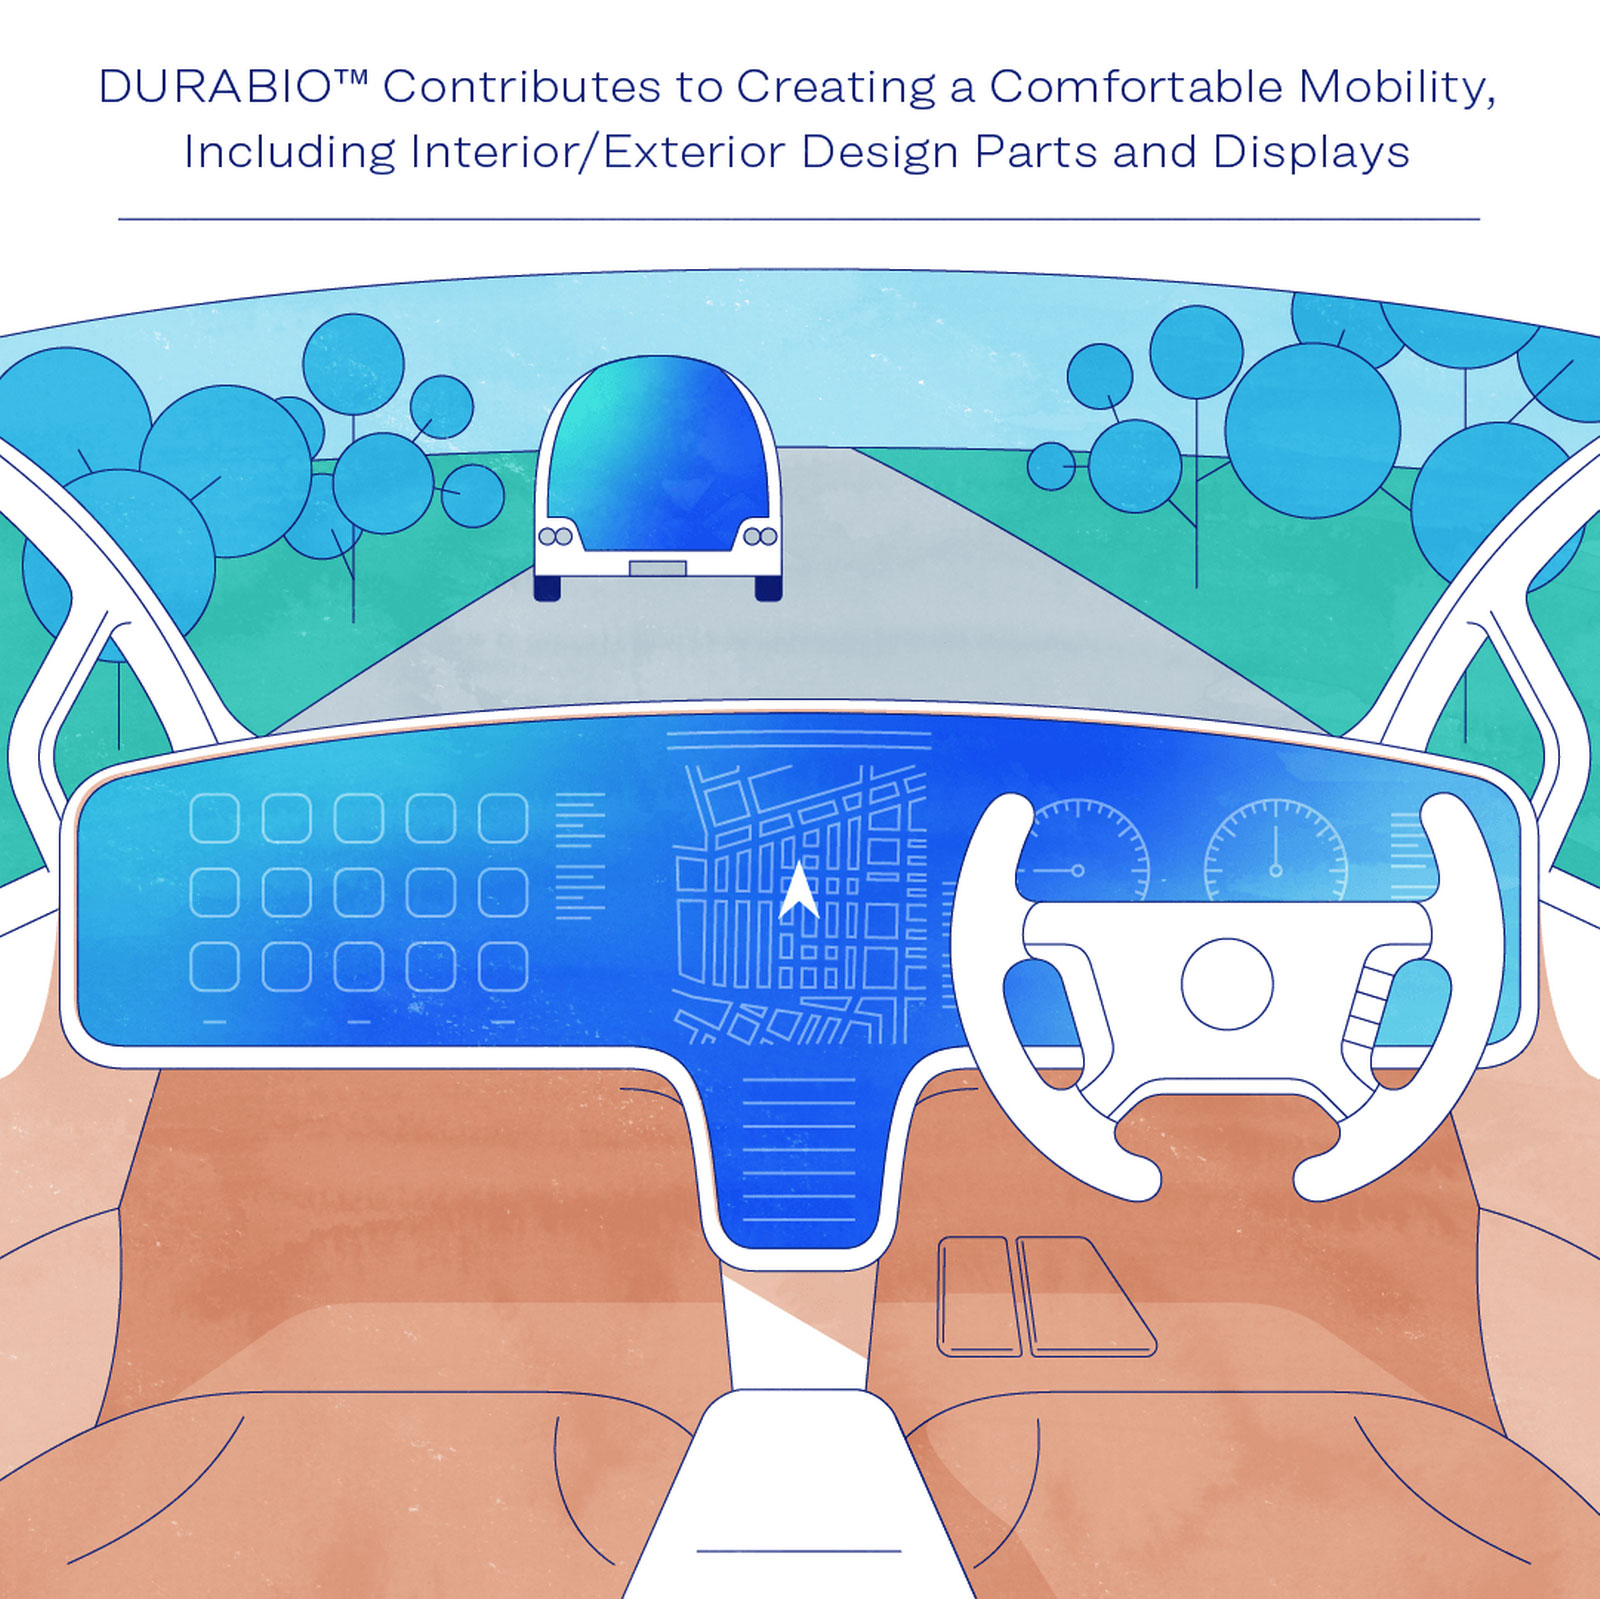 DURABIO™ Contrilutes to Creating a Confortable Mobility,Including Interior/Exterior Design Parts and Displays